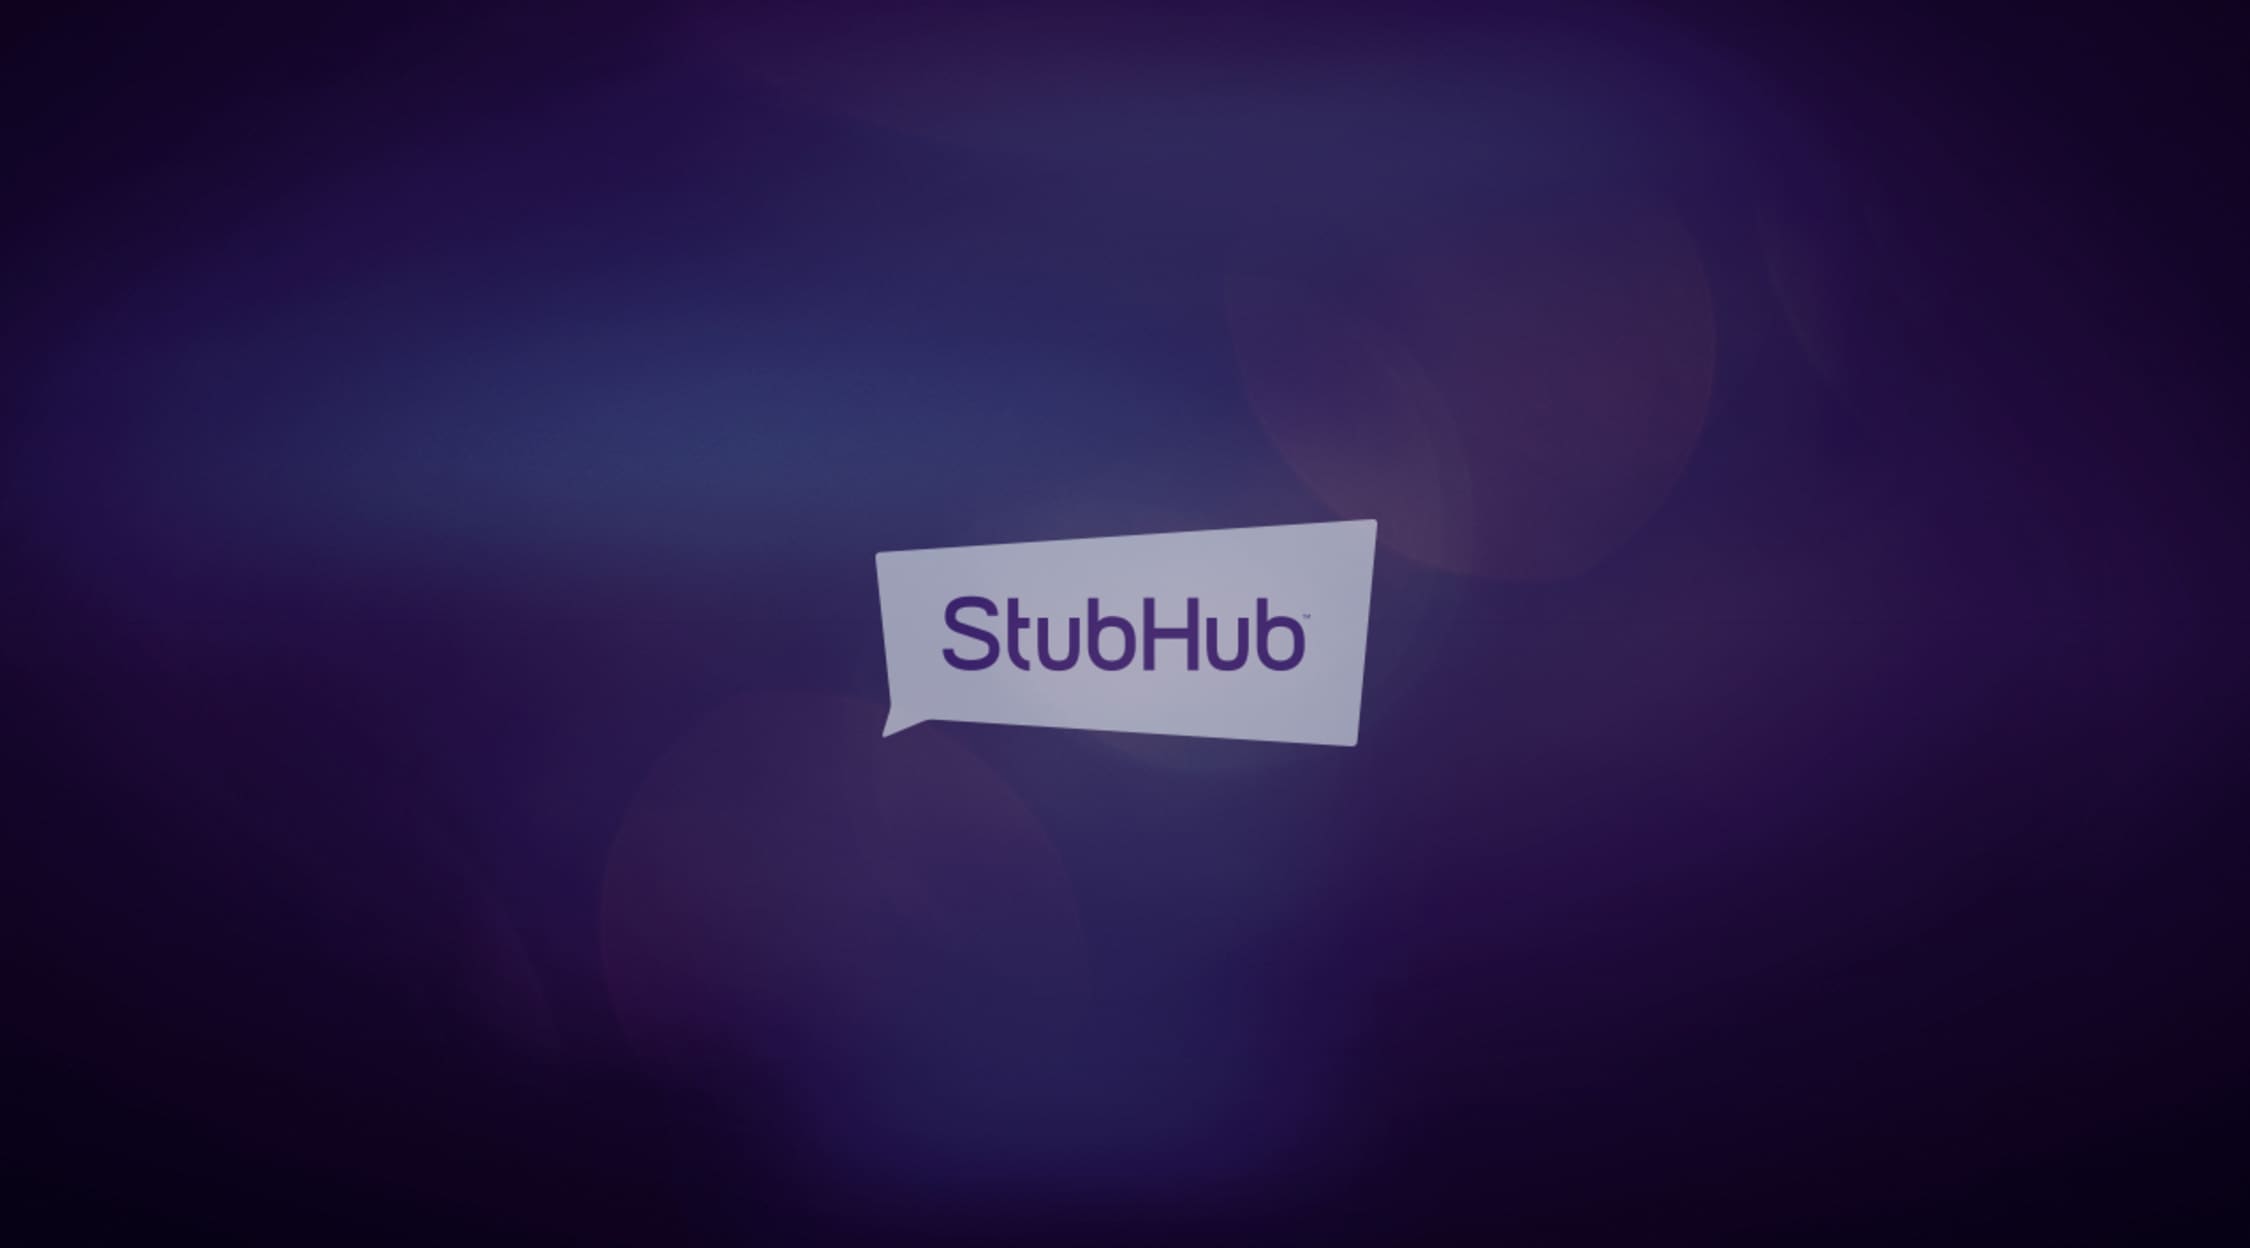 Portishead Tickets Portishead Concert Tickets and Tour Dates StubHub